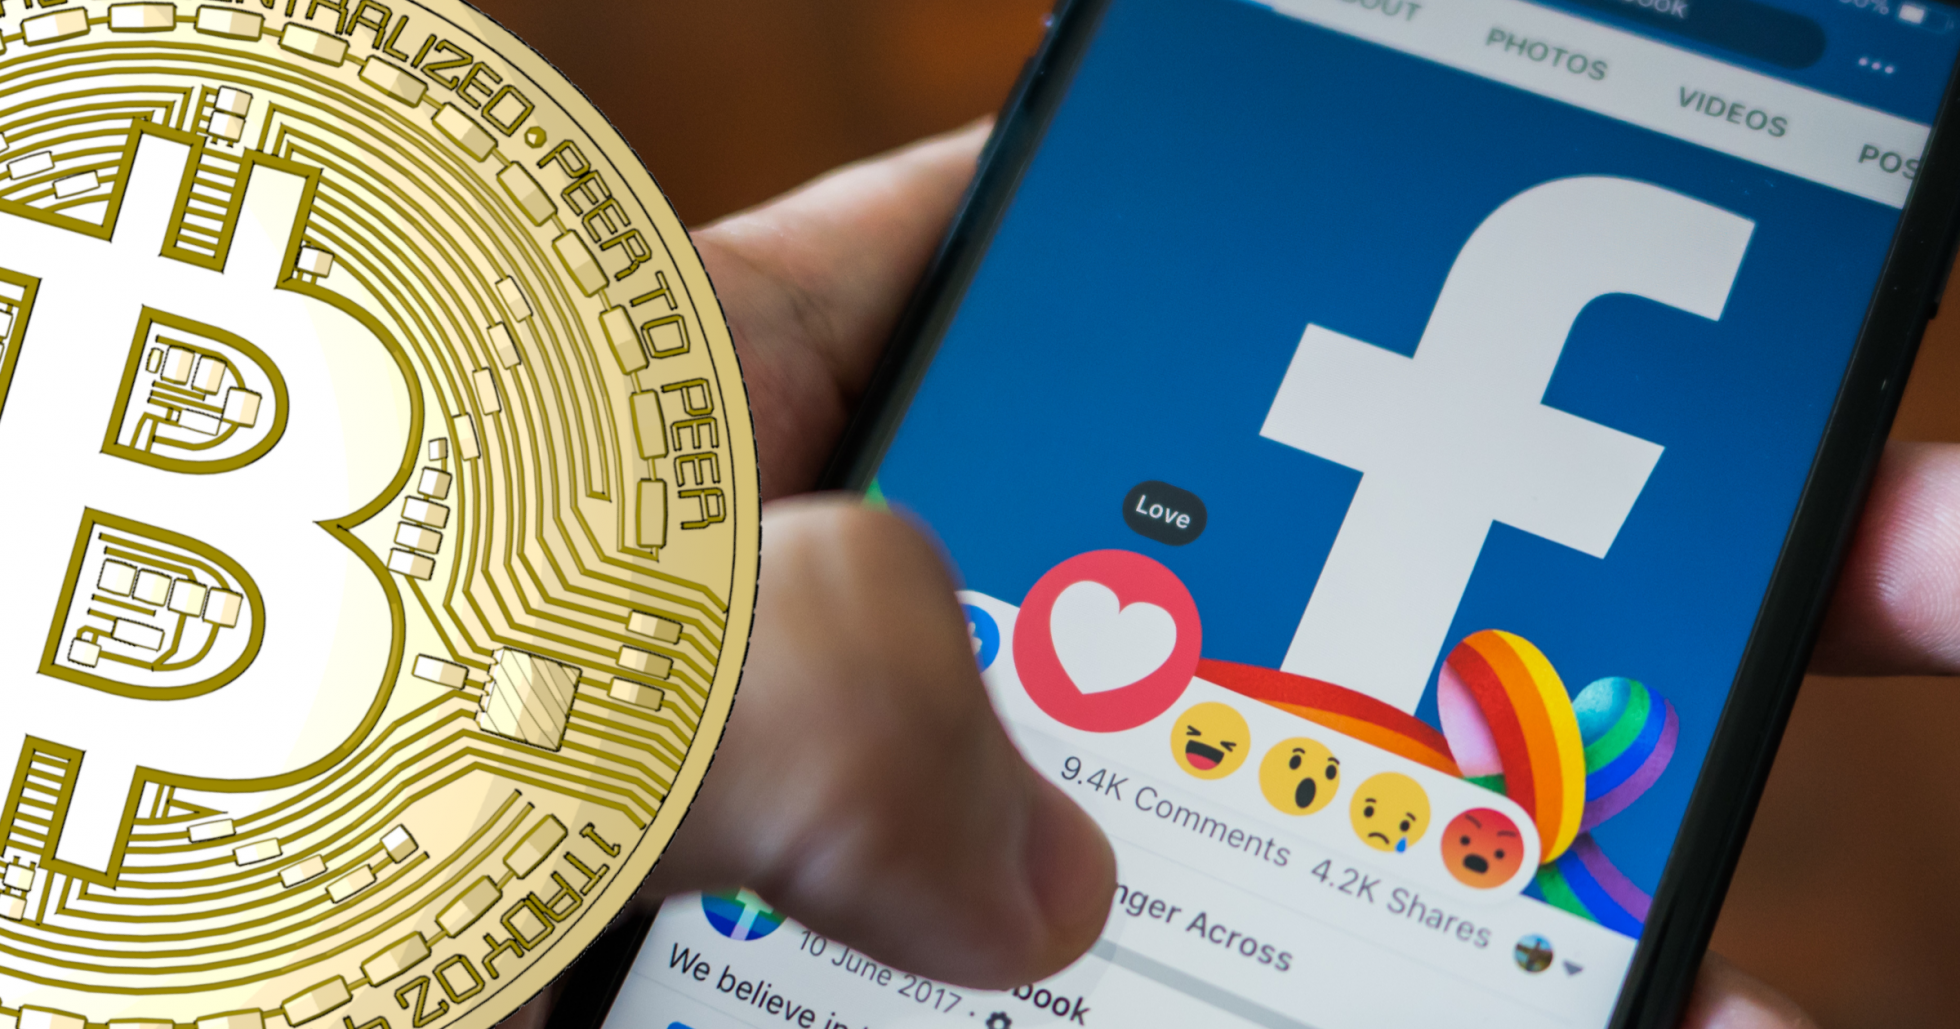 Facebook Cryptocurrency WhatsApp release date